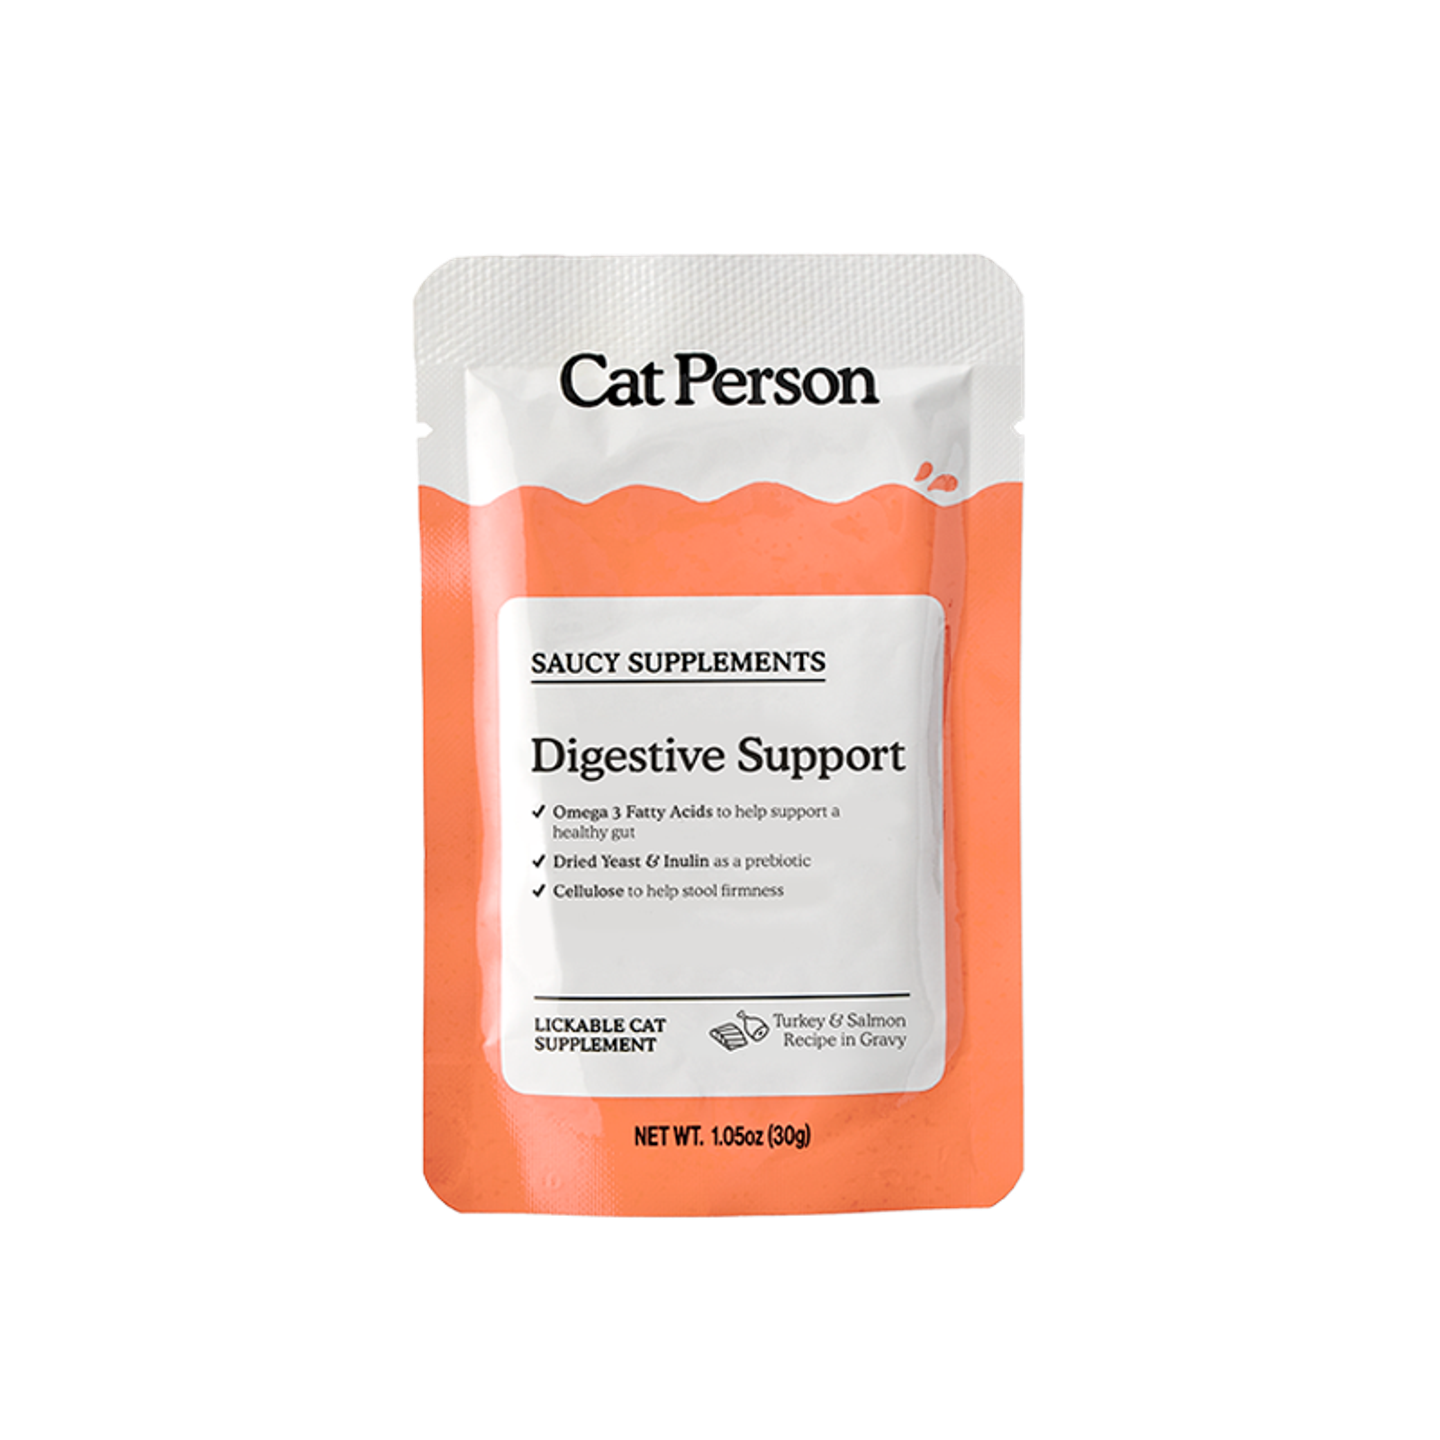 Carton of Cat Person Digestive Support Saucy Supplements